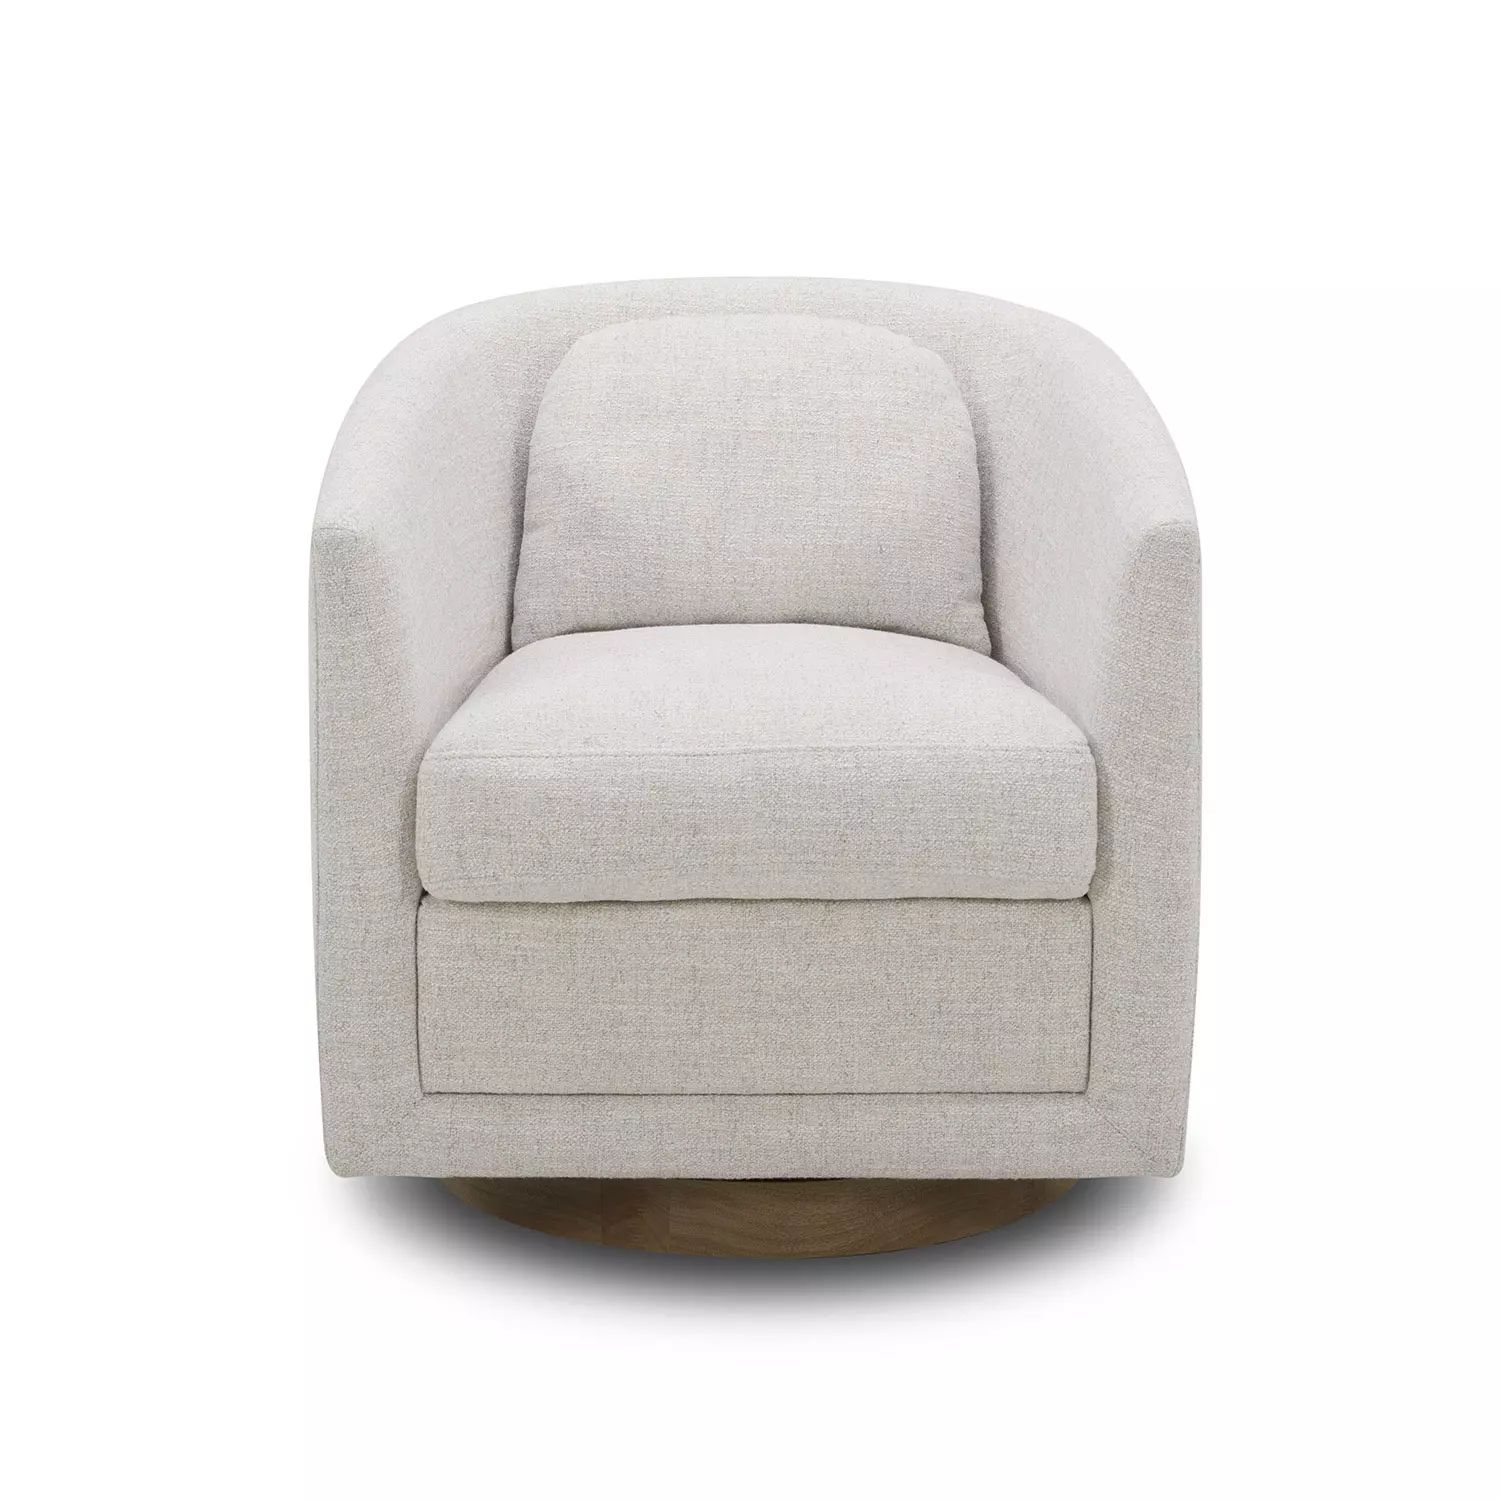 details by Becki Owens Isla Upholstered Swivel Chair, Assorted Colors | Sam's Club